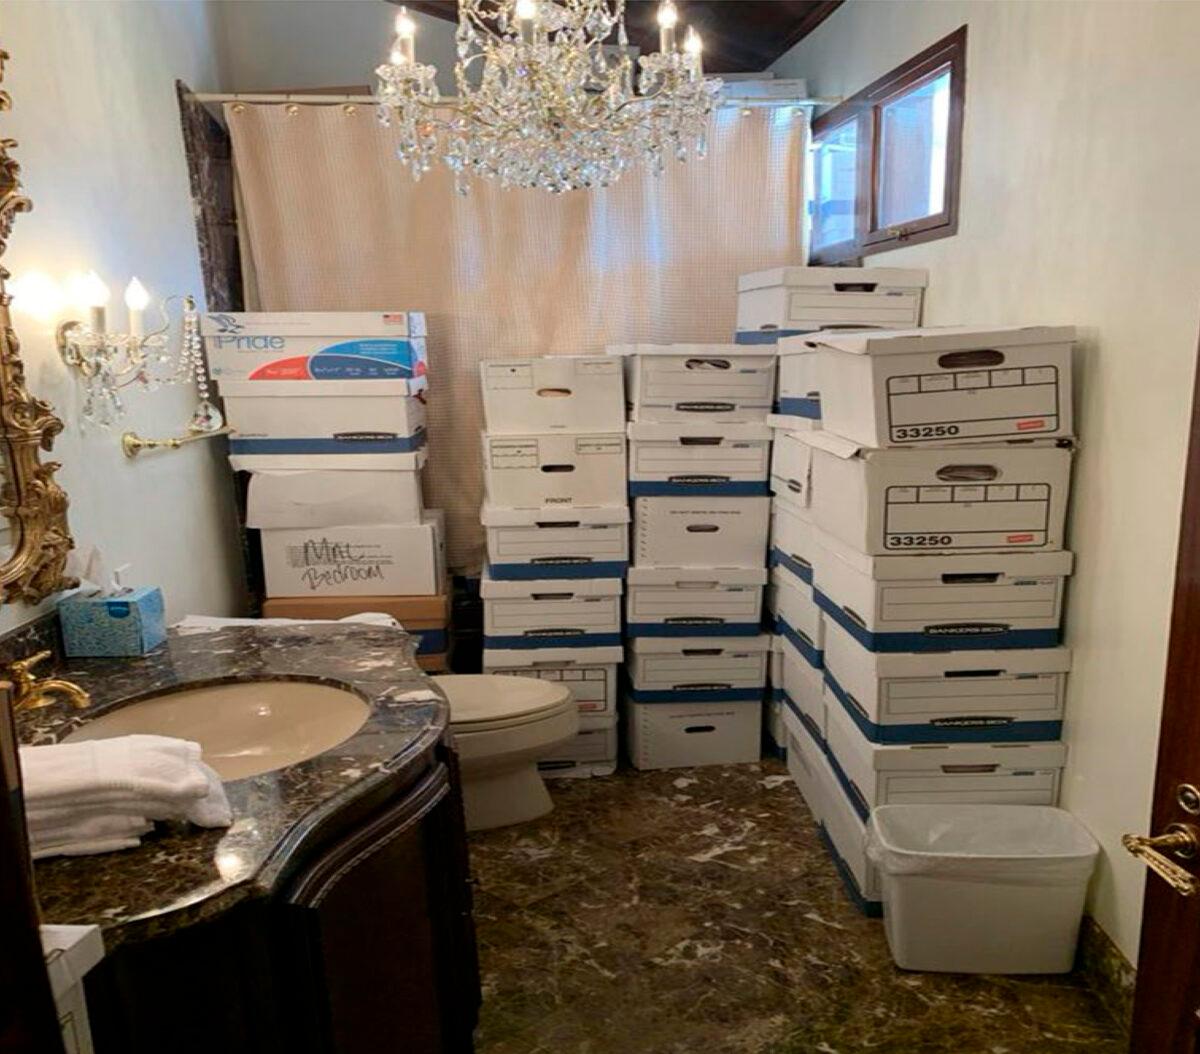 This image, contained in the indictment against former President Donald Trump, shows boxes of records stored in a bathroom and shower in a bathroom at Trump's Mar-a-Lago estate in Palm Beach, Fla. (Department of Justice via AP)